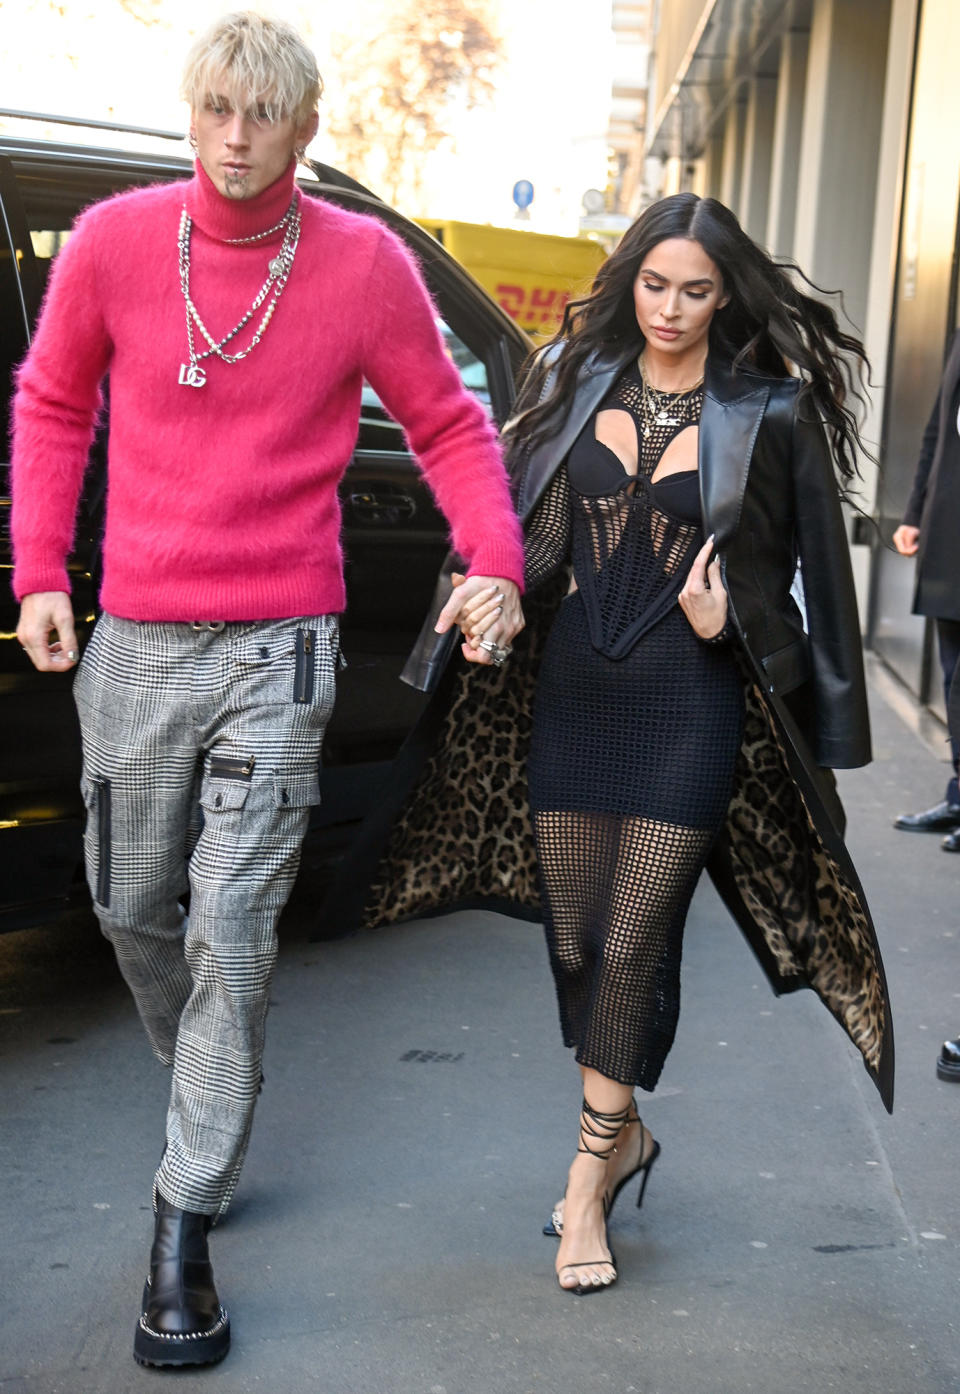 <p>Newly engaged Machine Gun Kelly and Megan Fox arrive at the Dolce & Gabbana showroom in Milan, Italy on Jan. 14. </p>